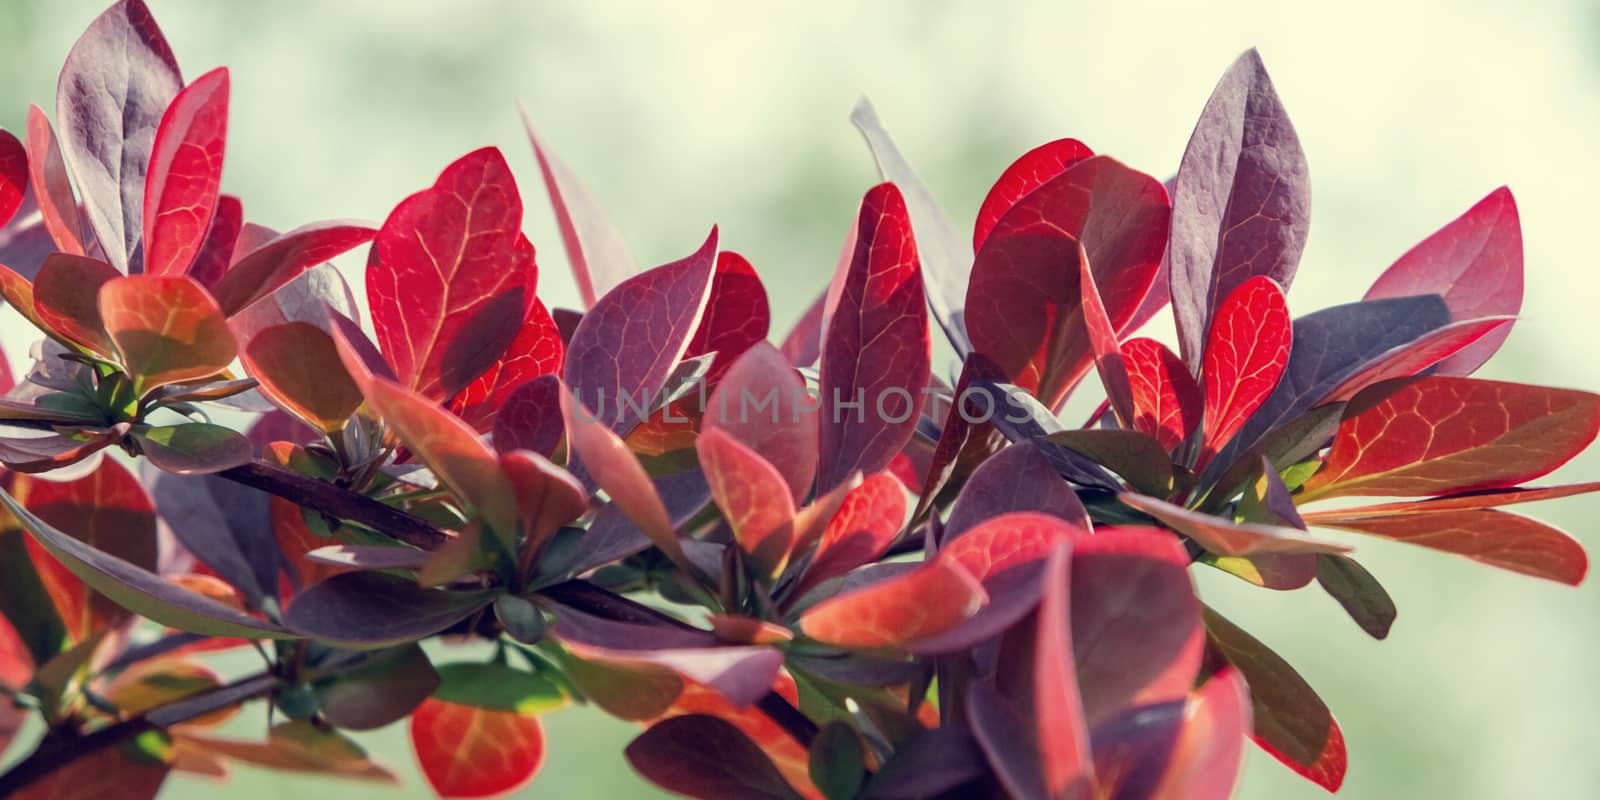 Twig Barberry Thunberg with red leaves close up, horizontal banner, natural plant background by galsand